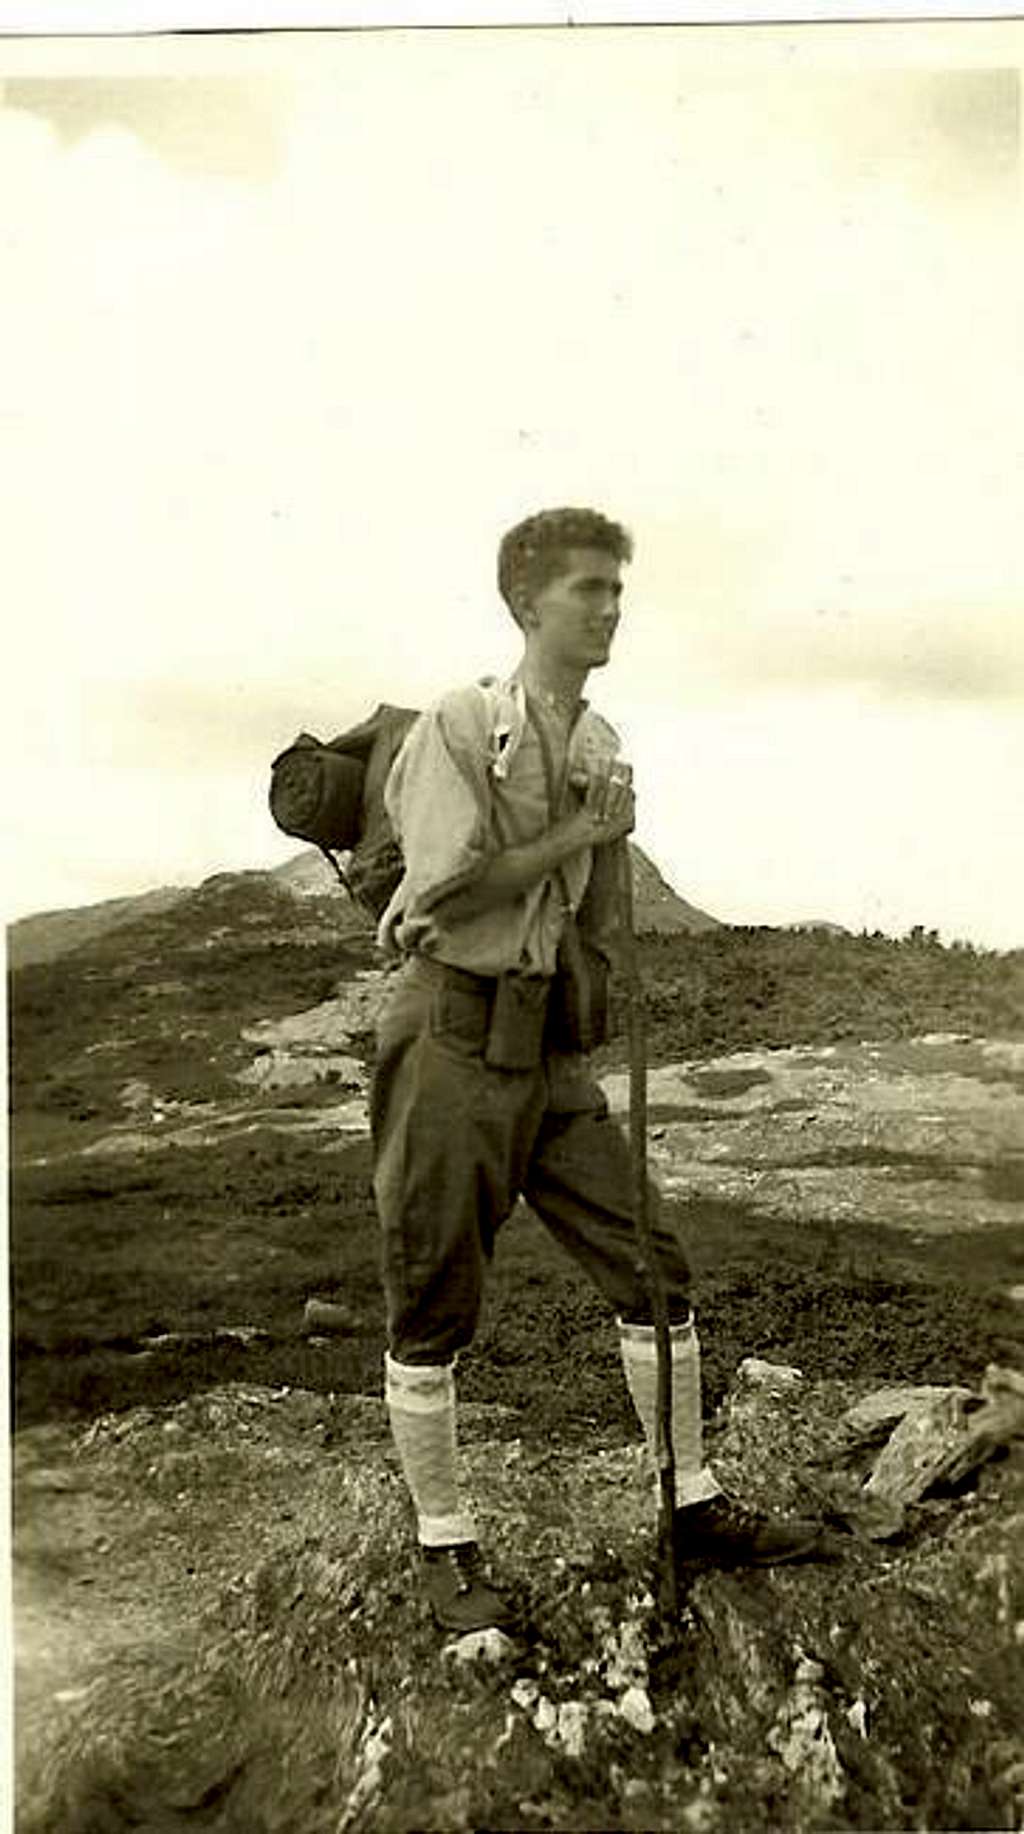 My Great Uncle on the ridge...